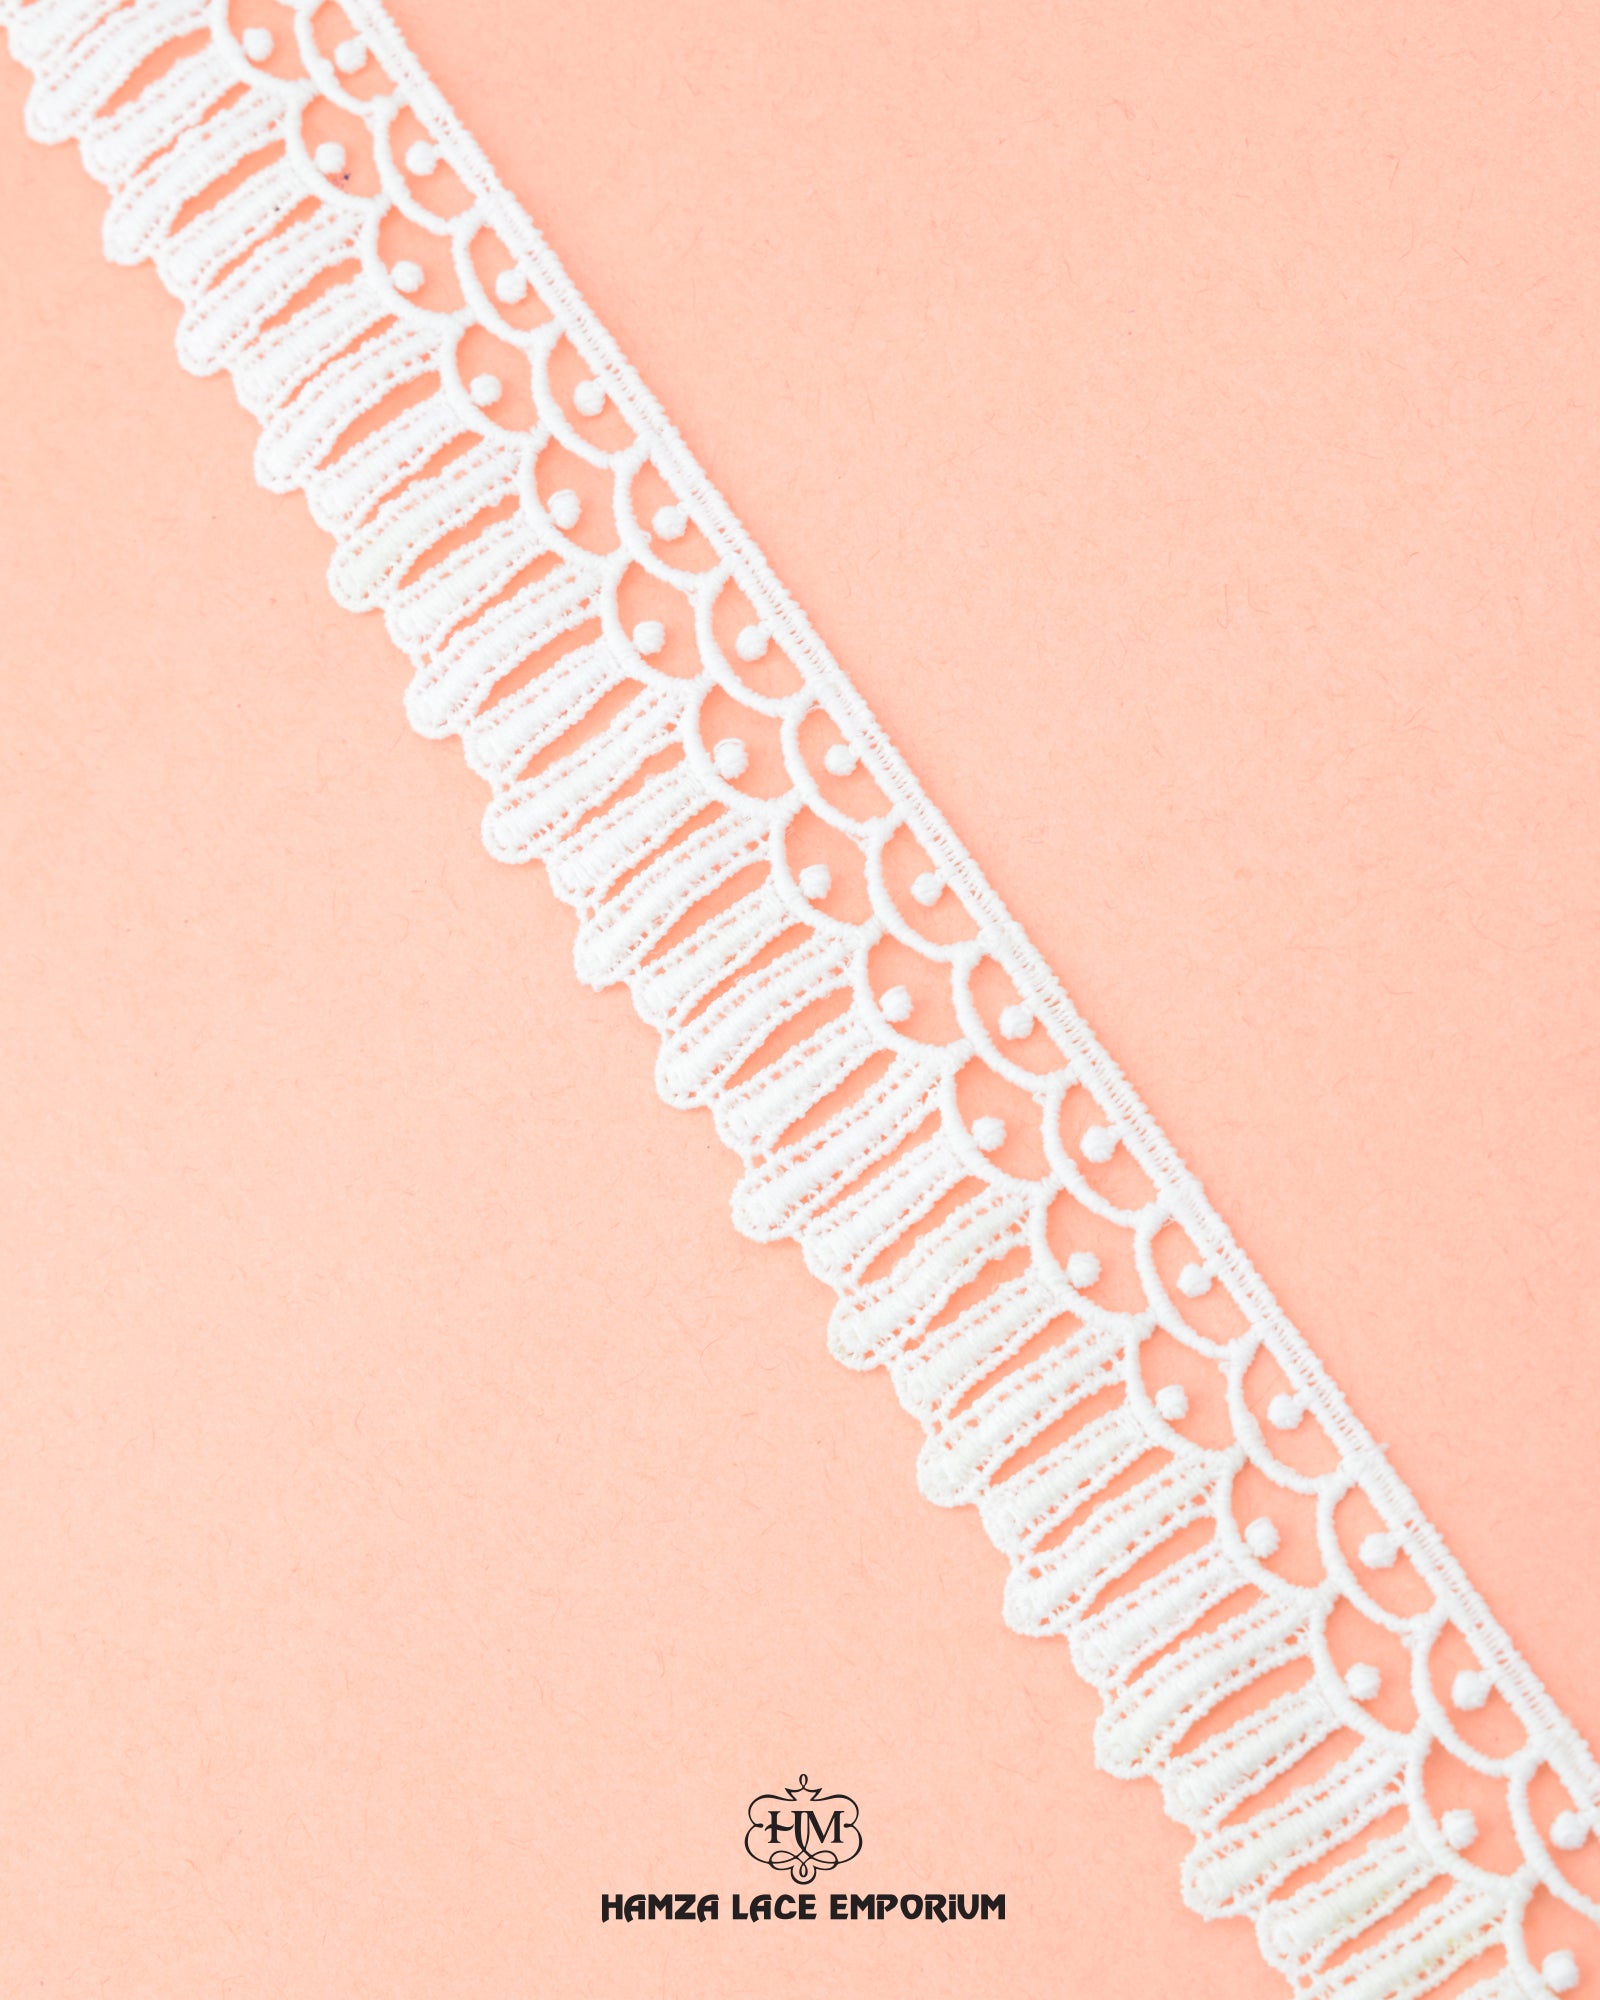 'Edging Jhaalar Lace 4239' with the 'Hamza Lace' sign at the bottom